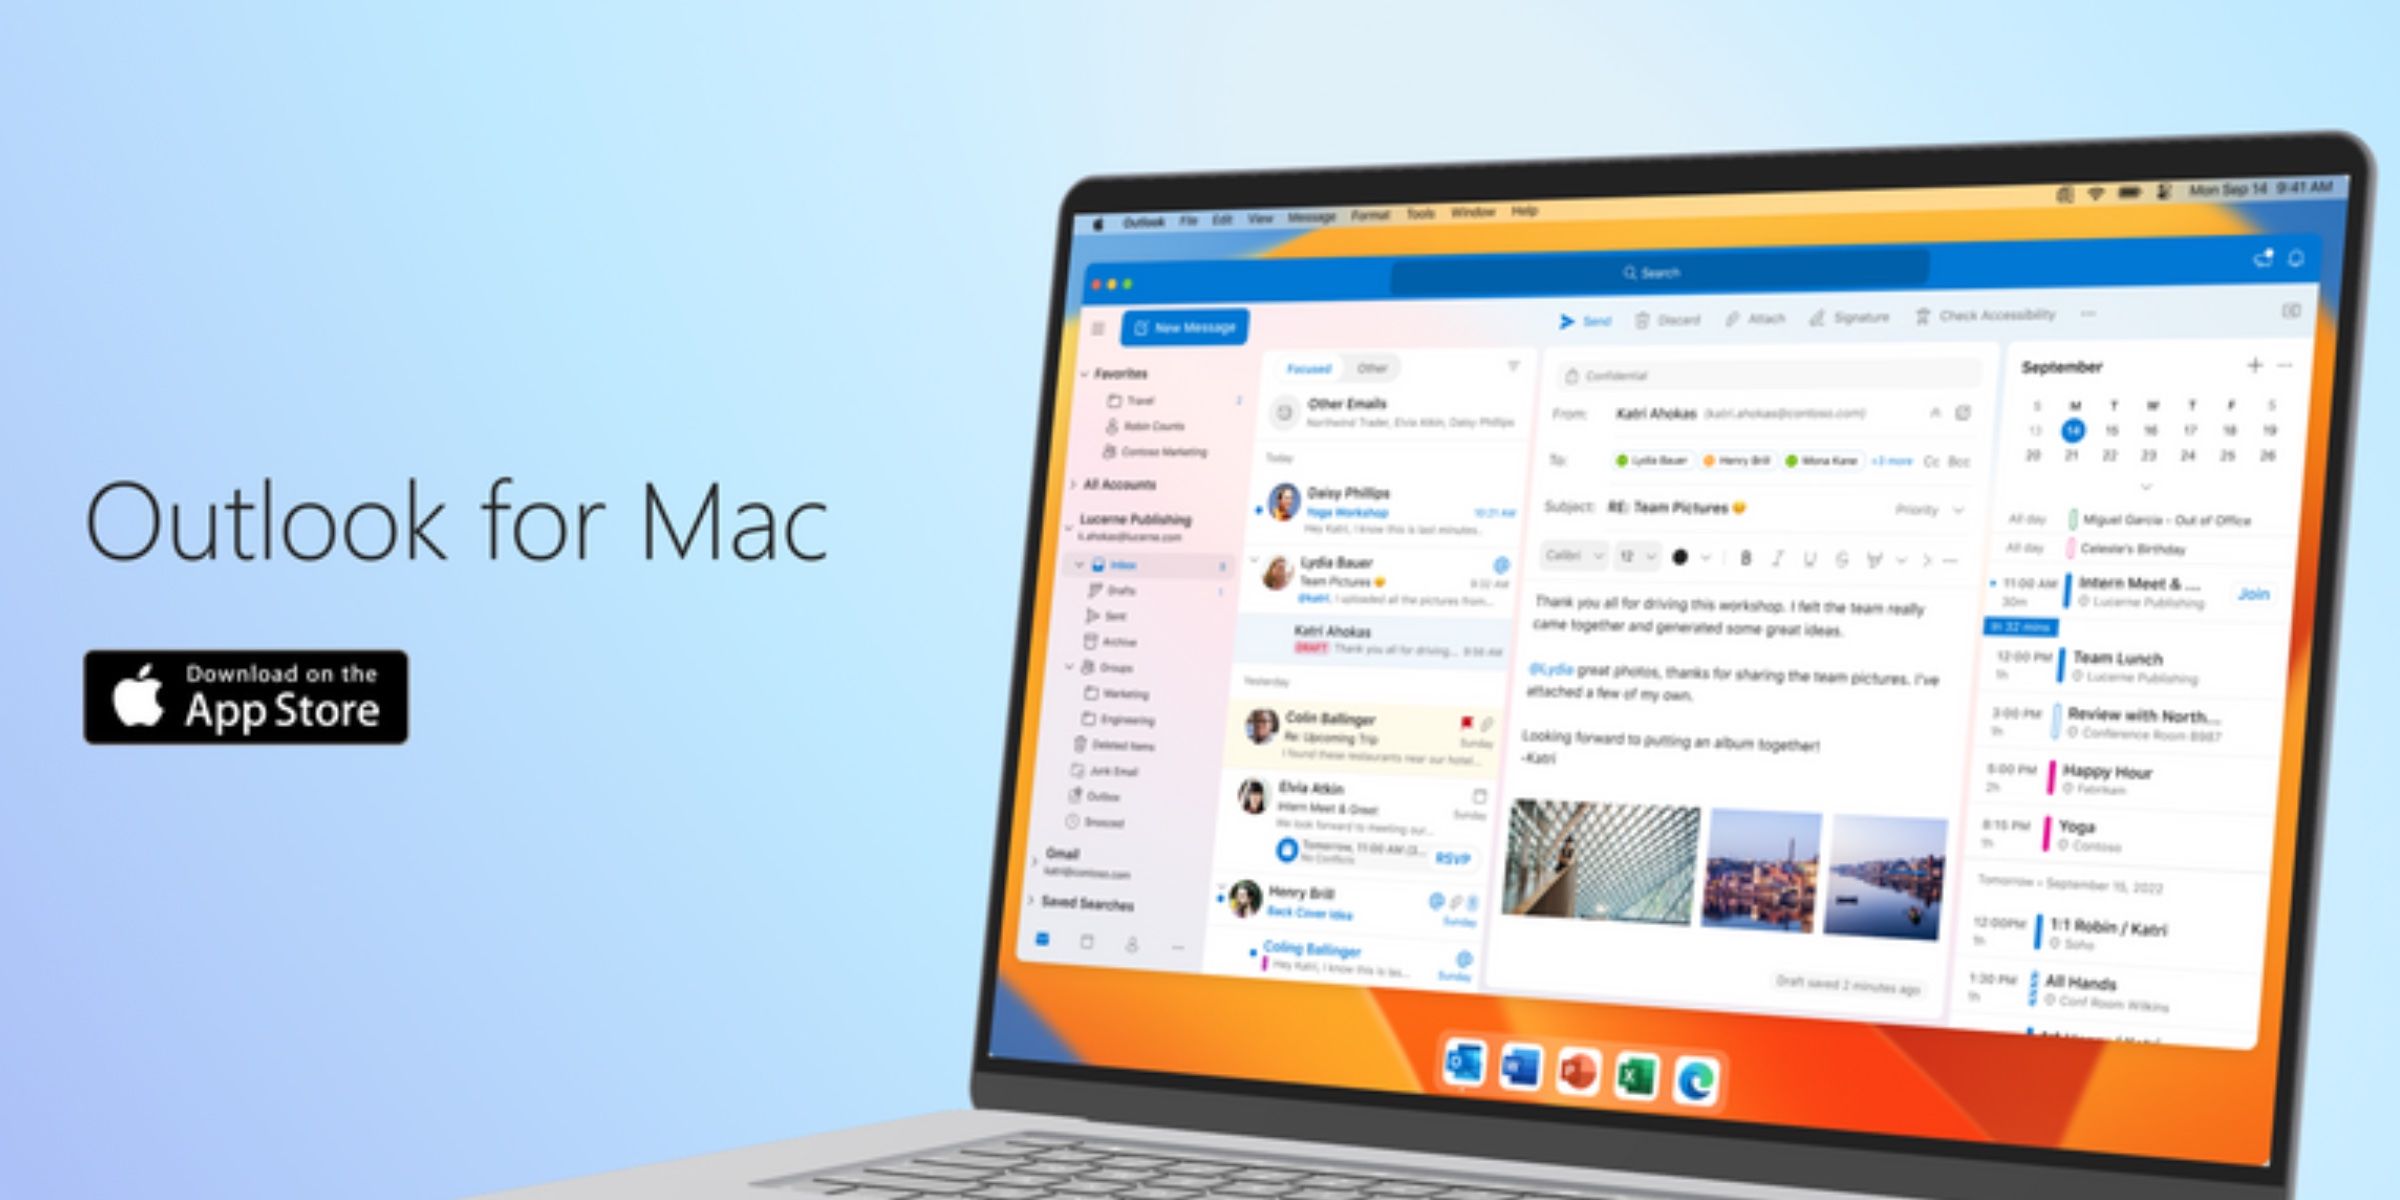 Promotional image showing Microsoft Outlook for Mac.